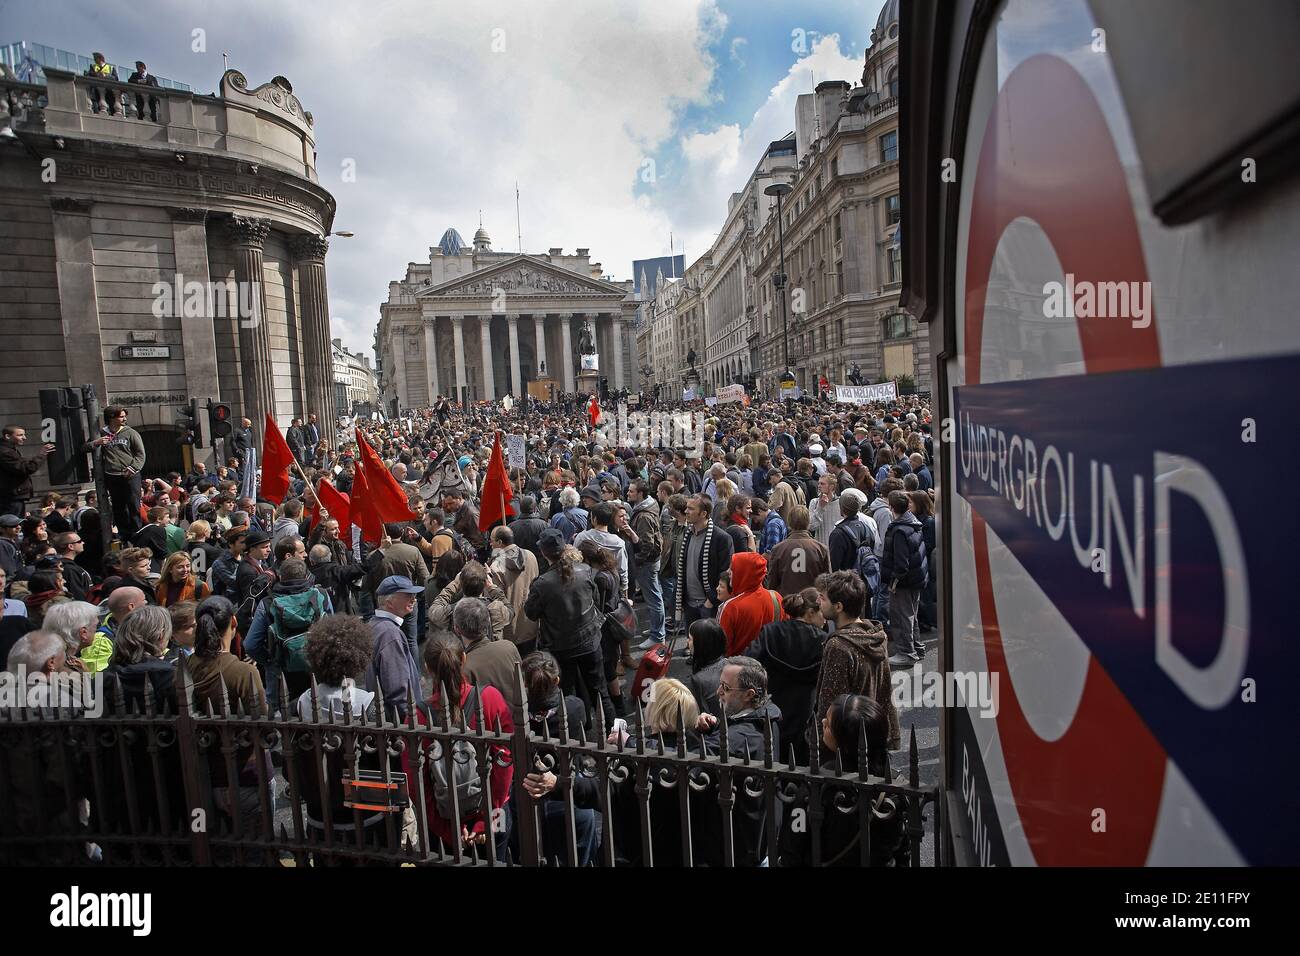 Protesters converge on the Bank of England as anti capitalist and climate change activists demonstrate in the city of London, United Kingdom. Stock Photo